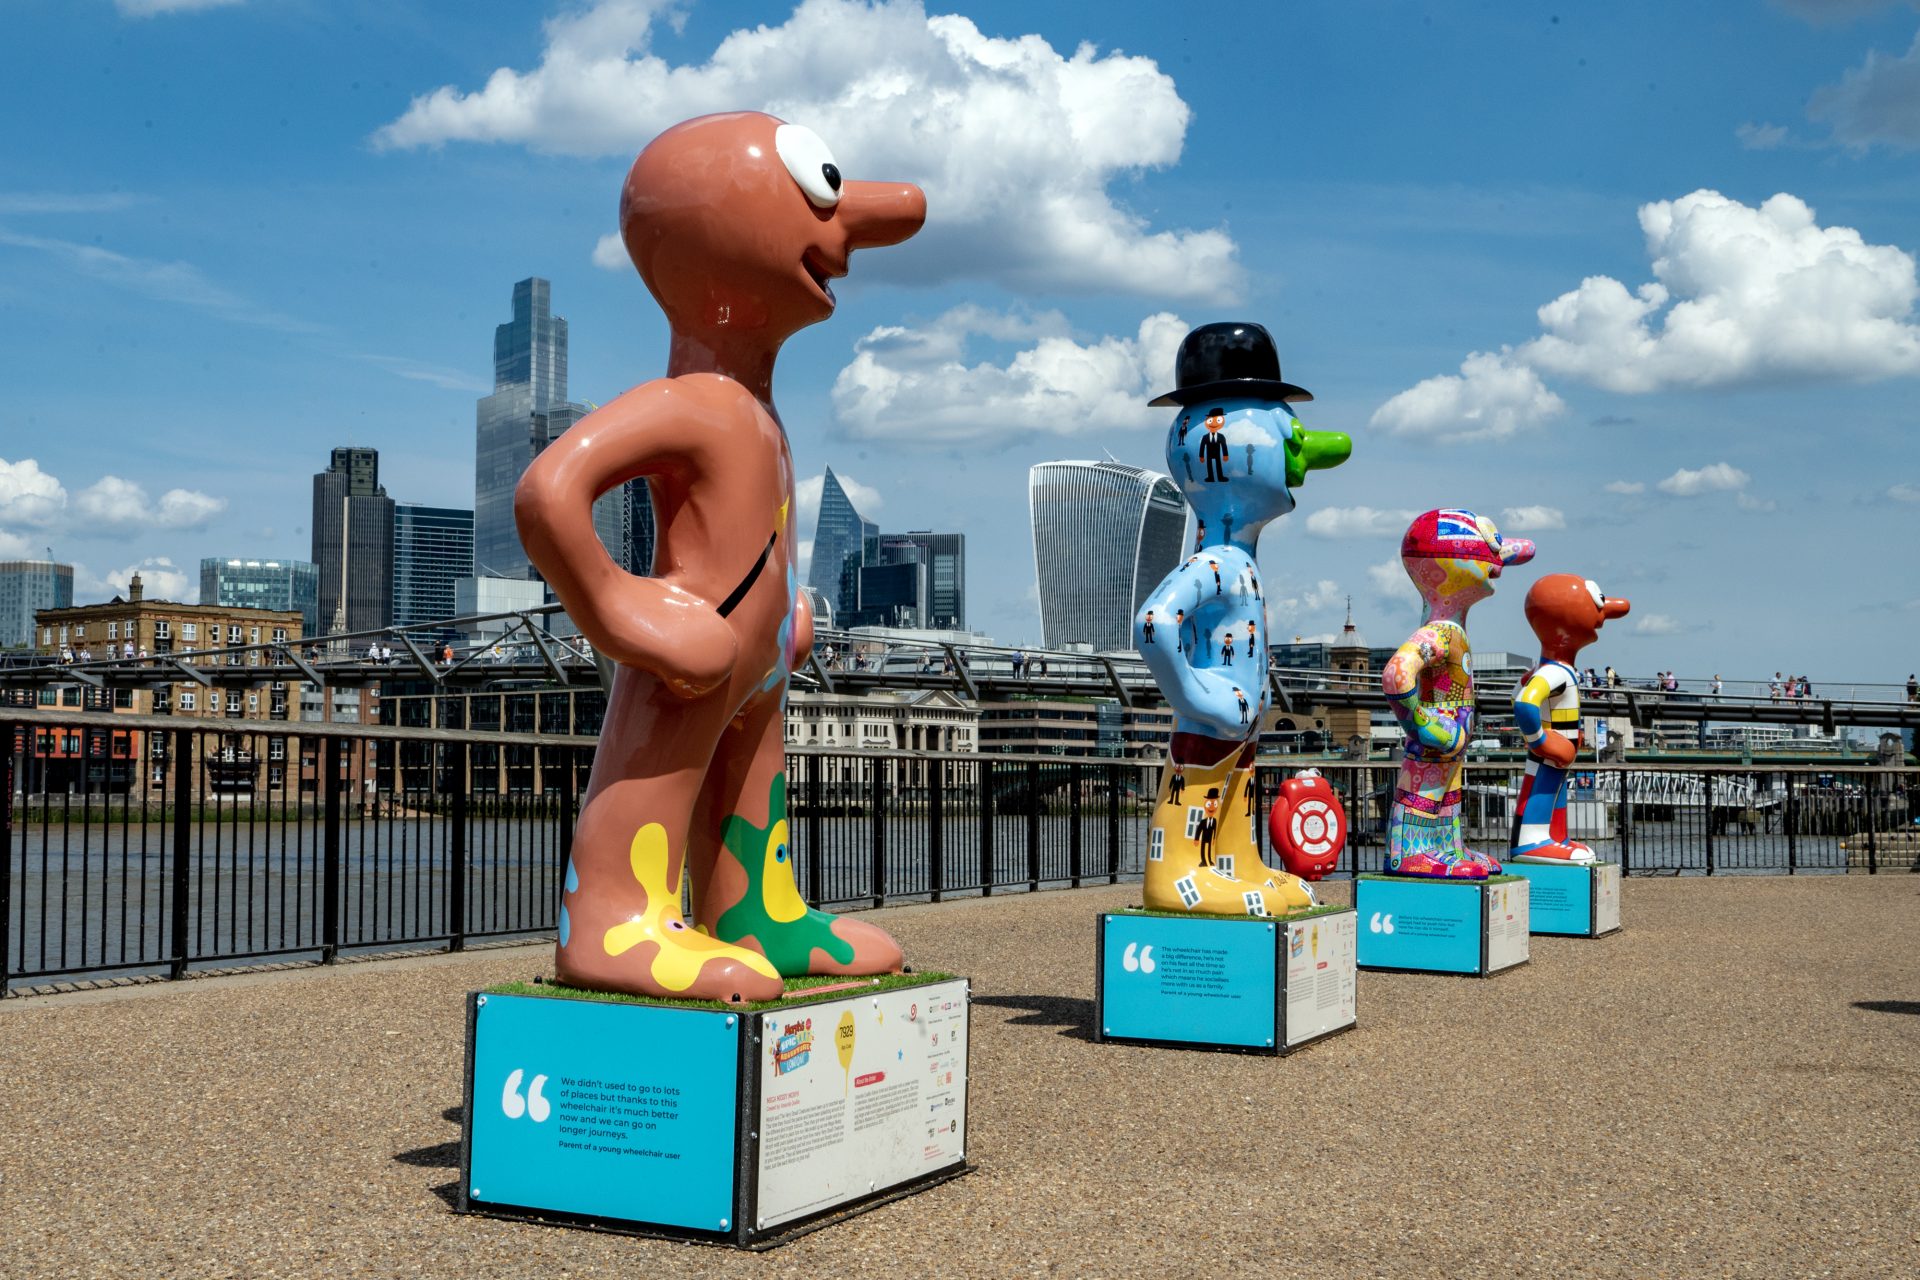 Morph scultures by the Southbank © Andy Newbold Photography